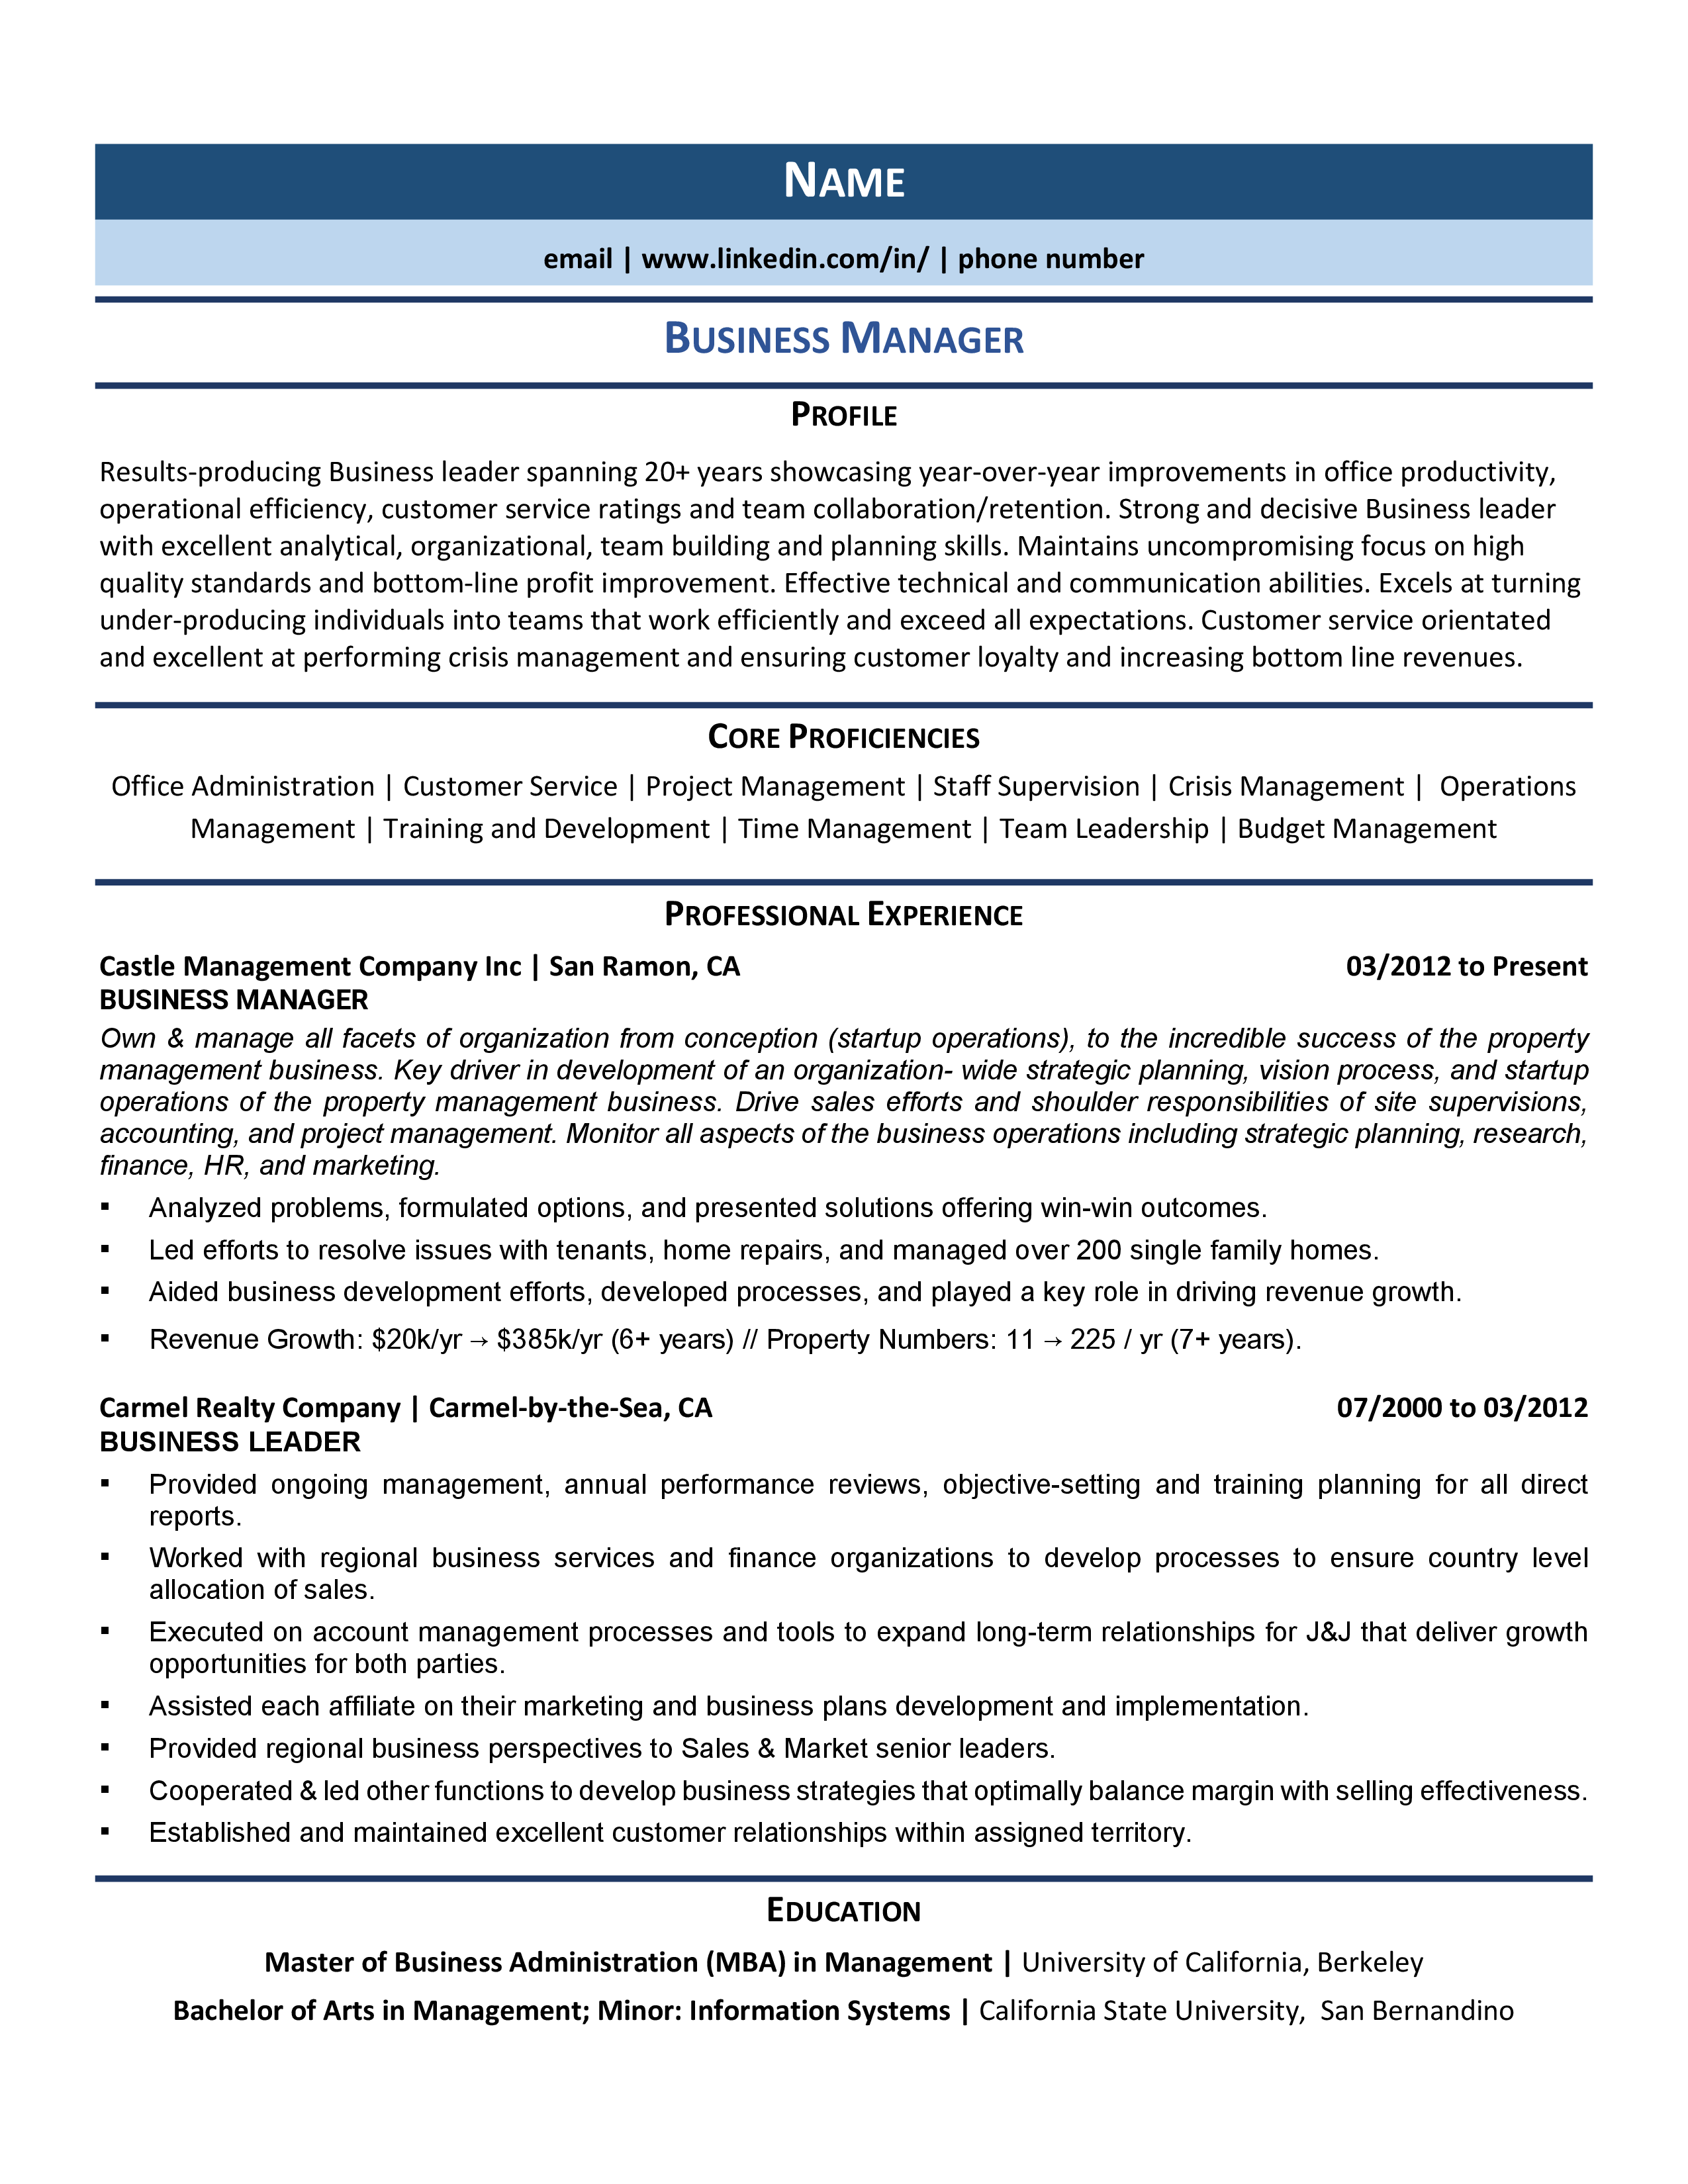 resume summary examples business management